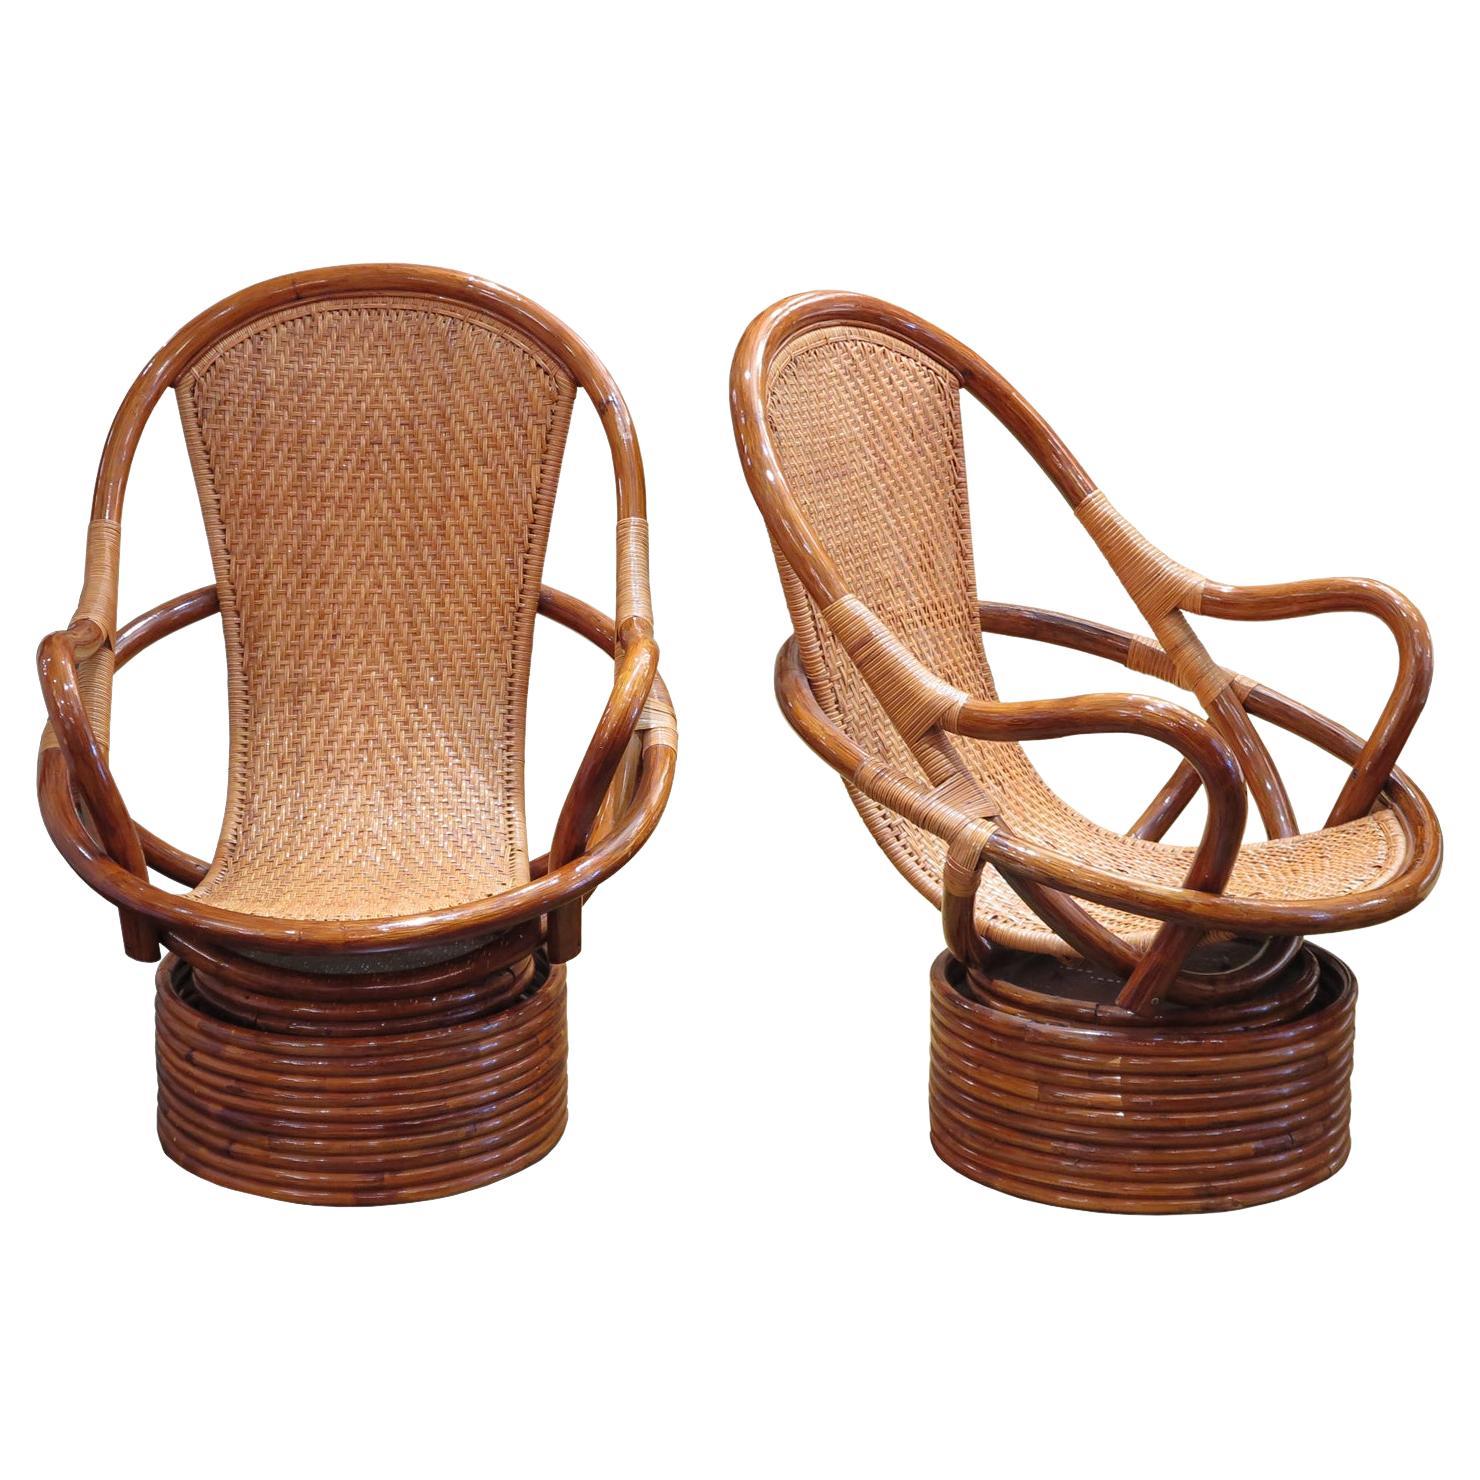 Pair of Lounge Chairs in Ratan Seat with Swivel Base, USA Late 20th Century